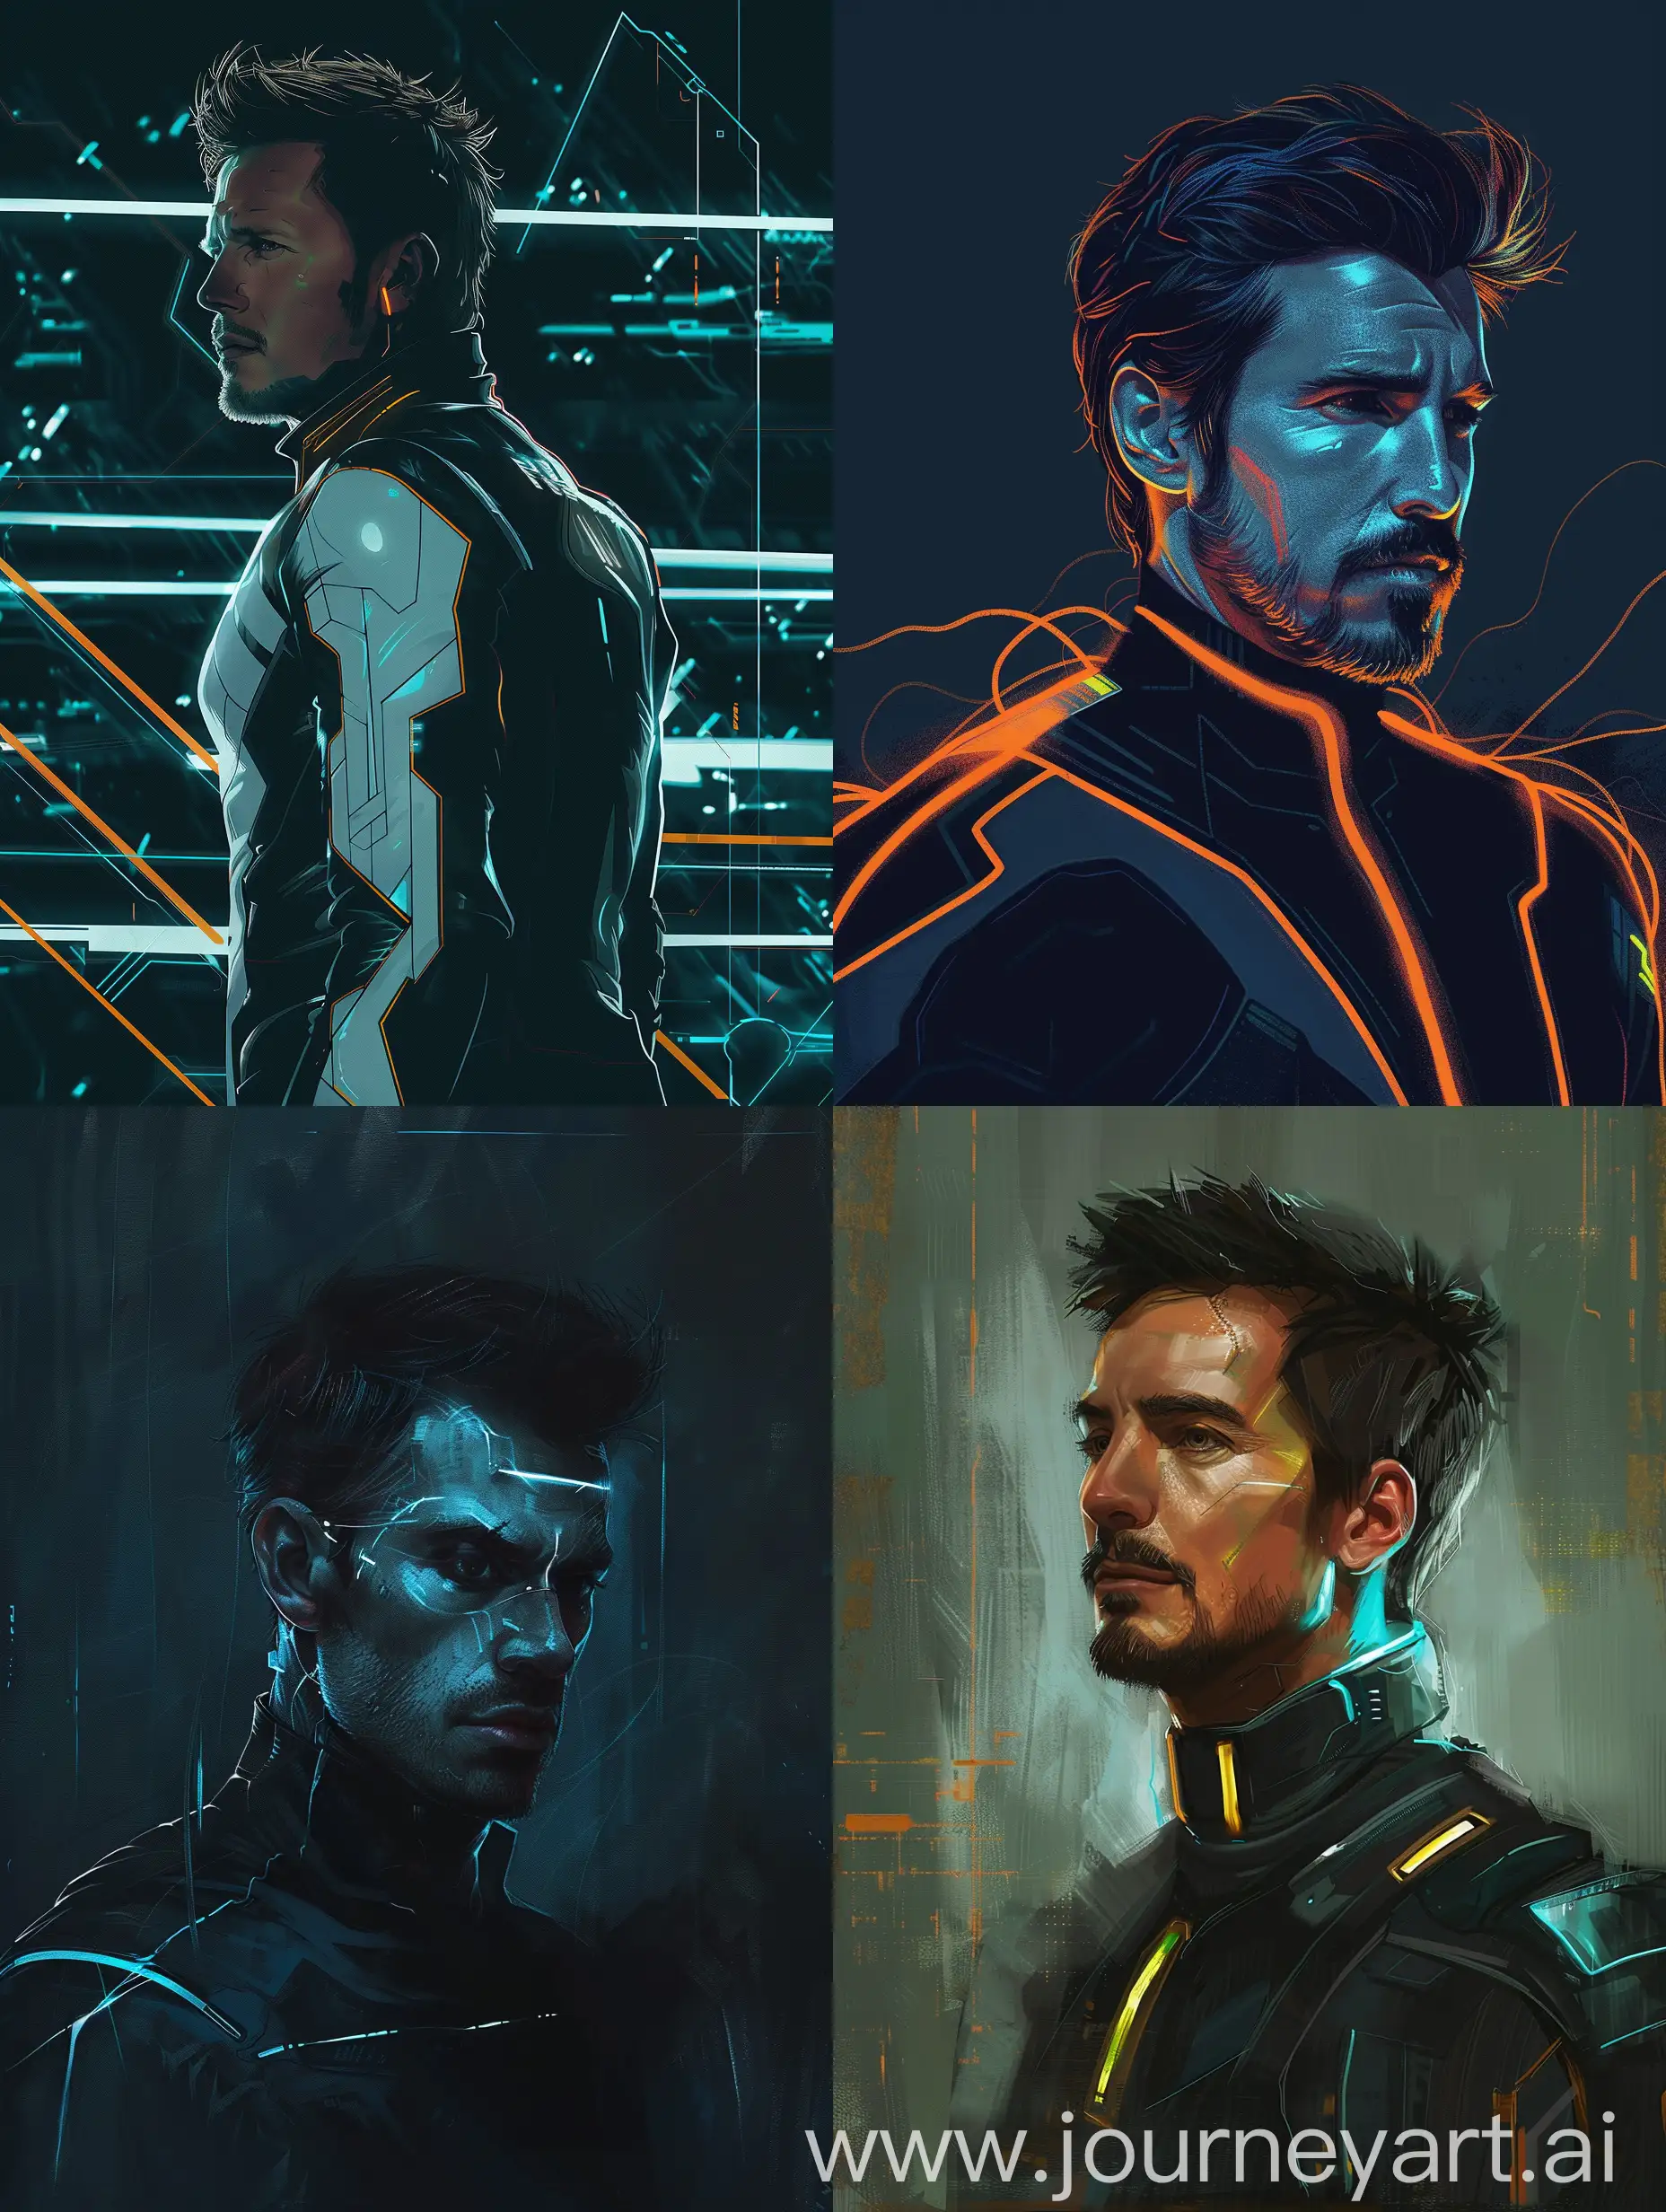 A portrait of man in the style of Tron Legacy portrait style